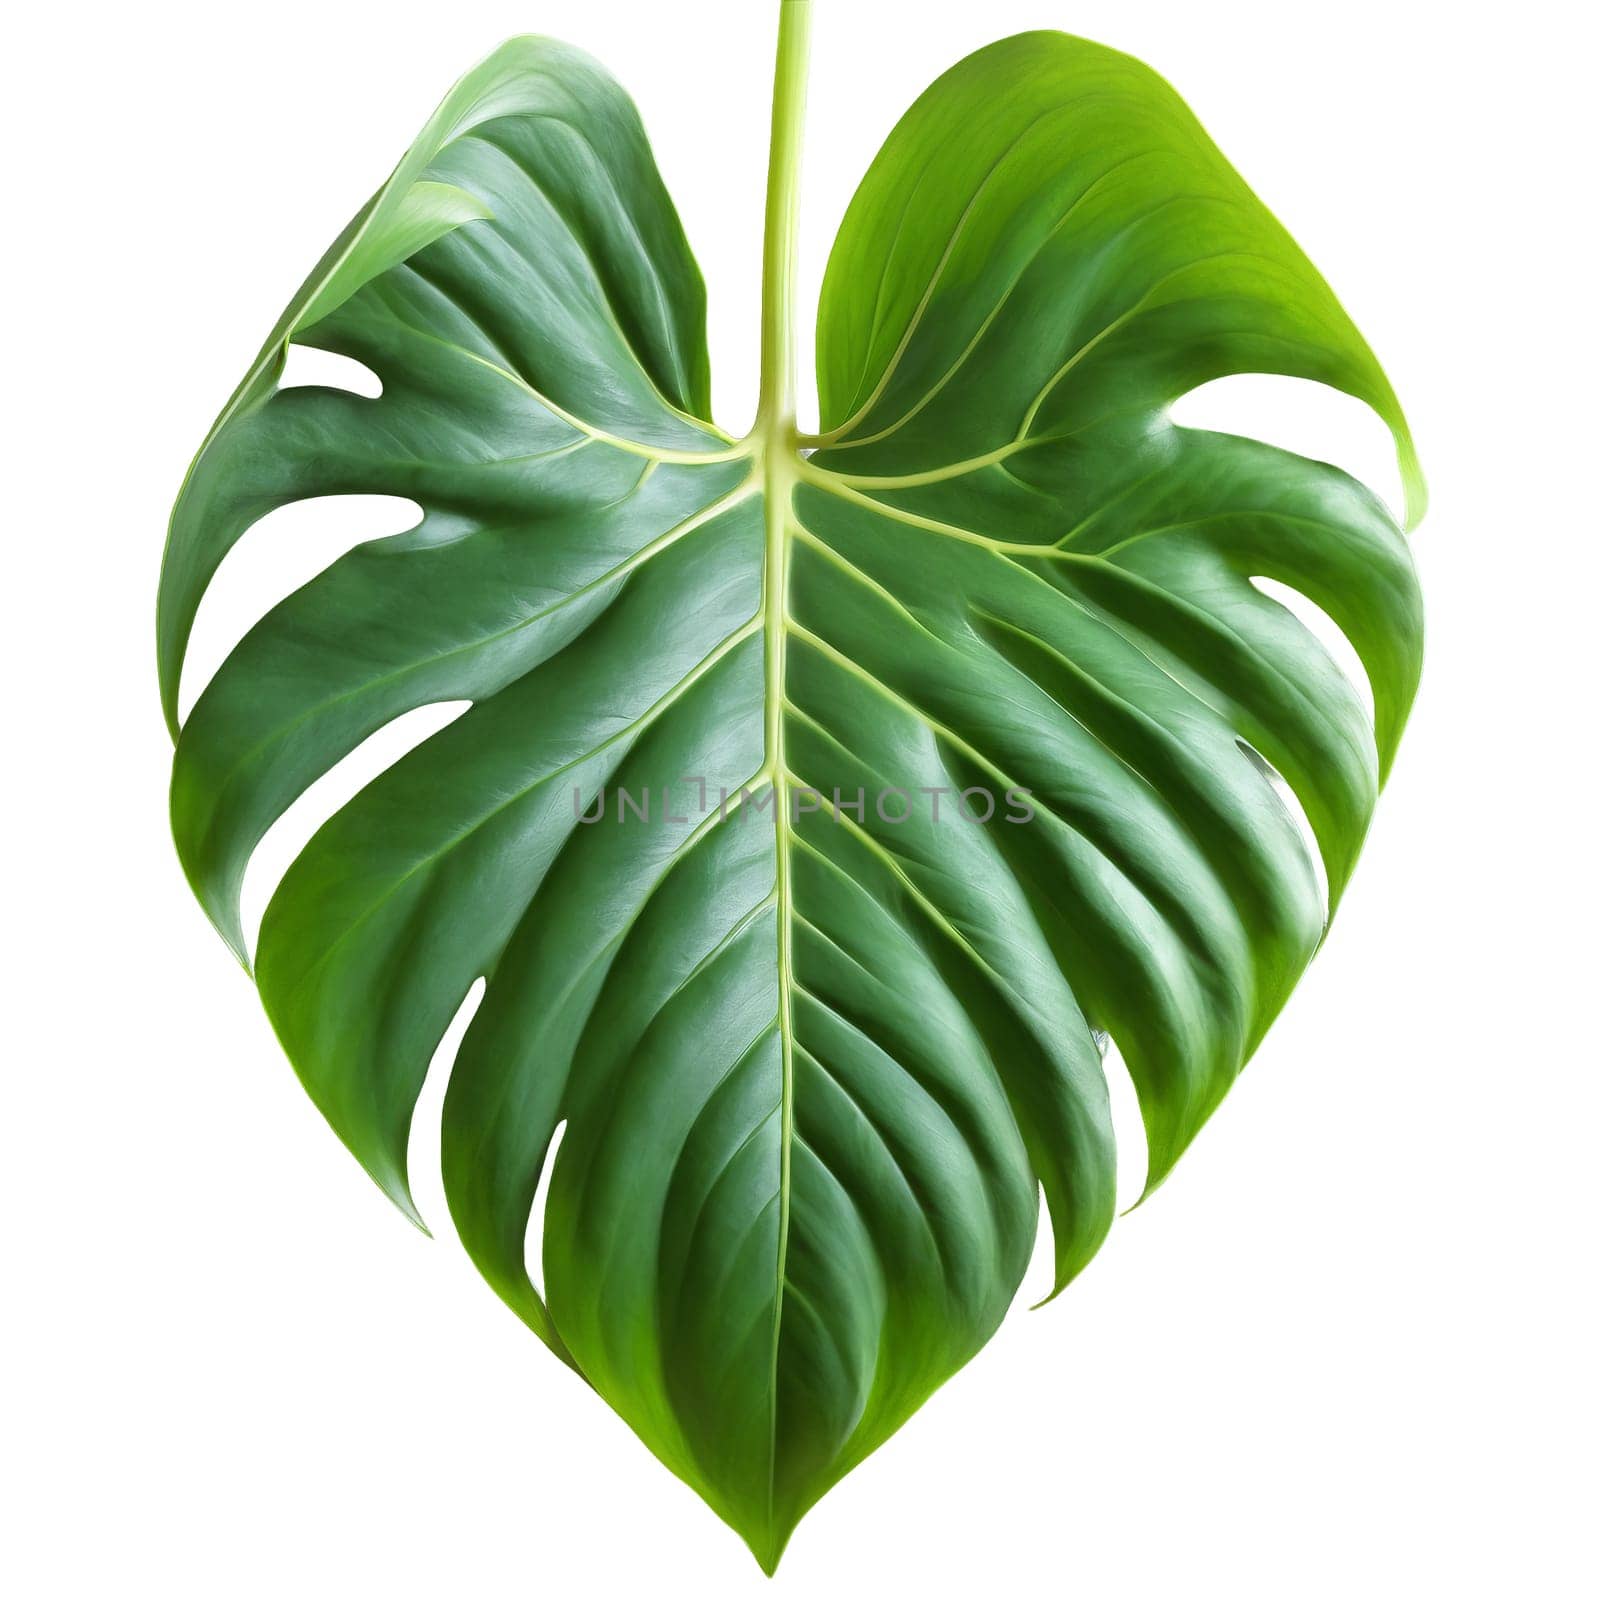 Philodendron leaf heart shaped green leaf with glossy surface and prominent veins Philodendron hederaceum by Matiunina